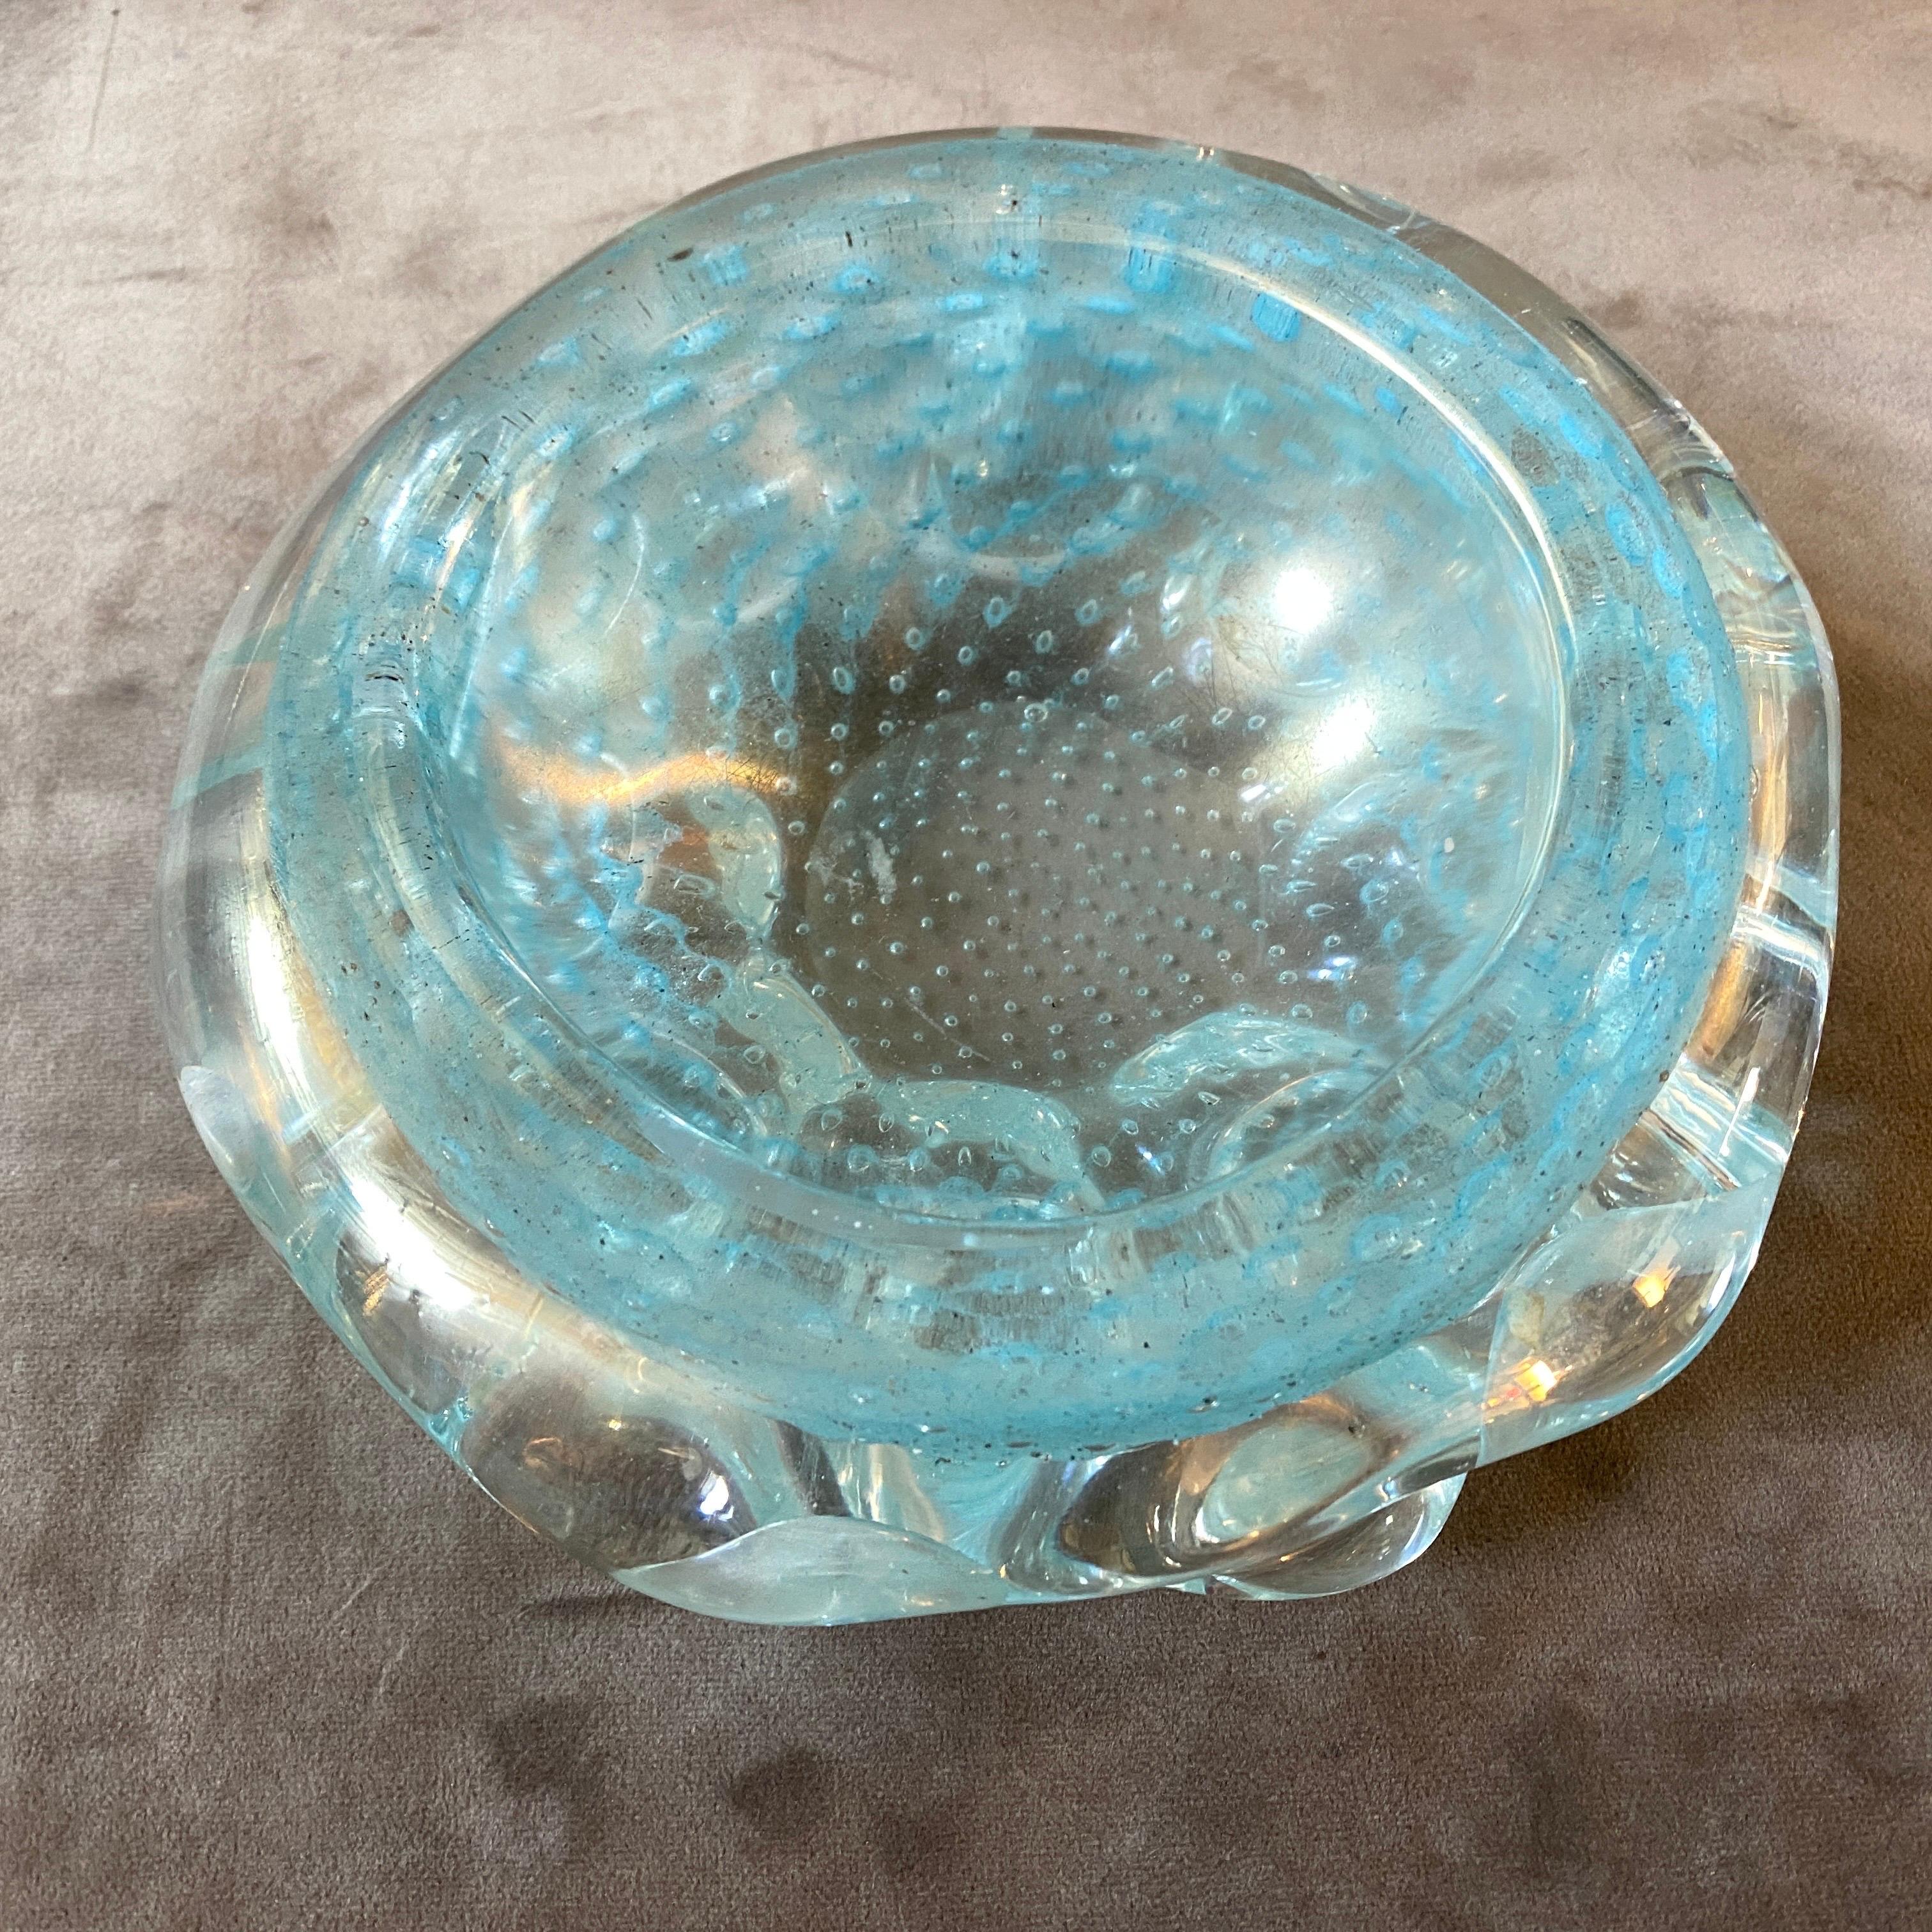 A Bullicante light blue murano glass ashtray made in Venice in the Seventies, it's in perfect conditions and it can be used also as a decorative bowl. The totally hand-crafted processing makes each of these object unique. The Barovier company, known